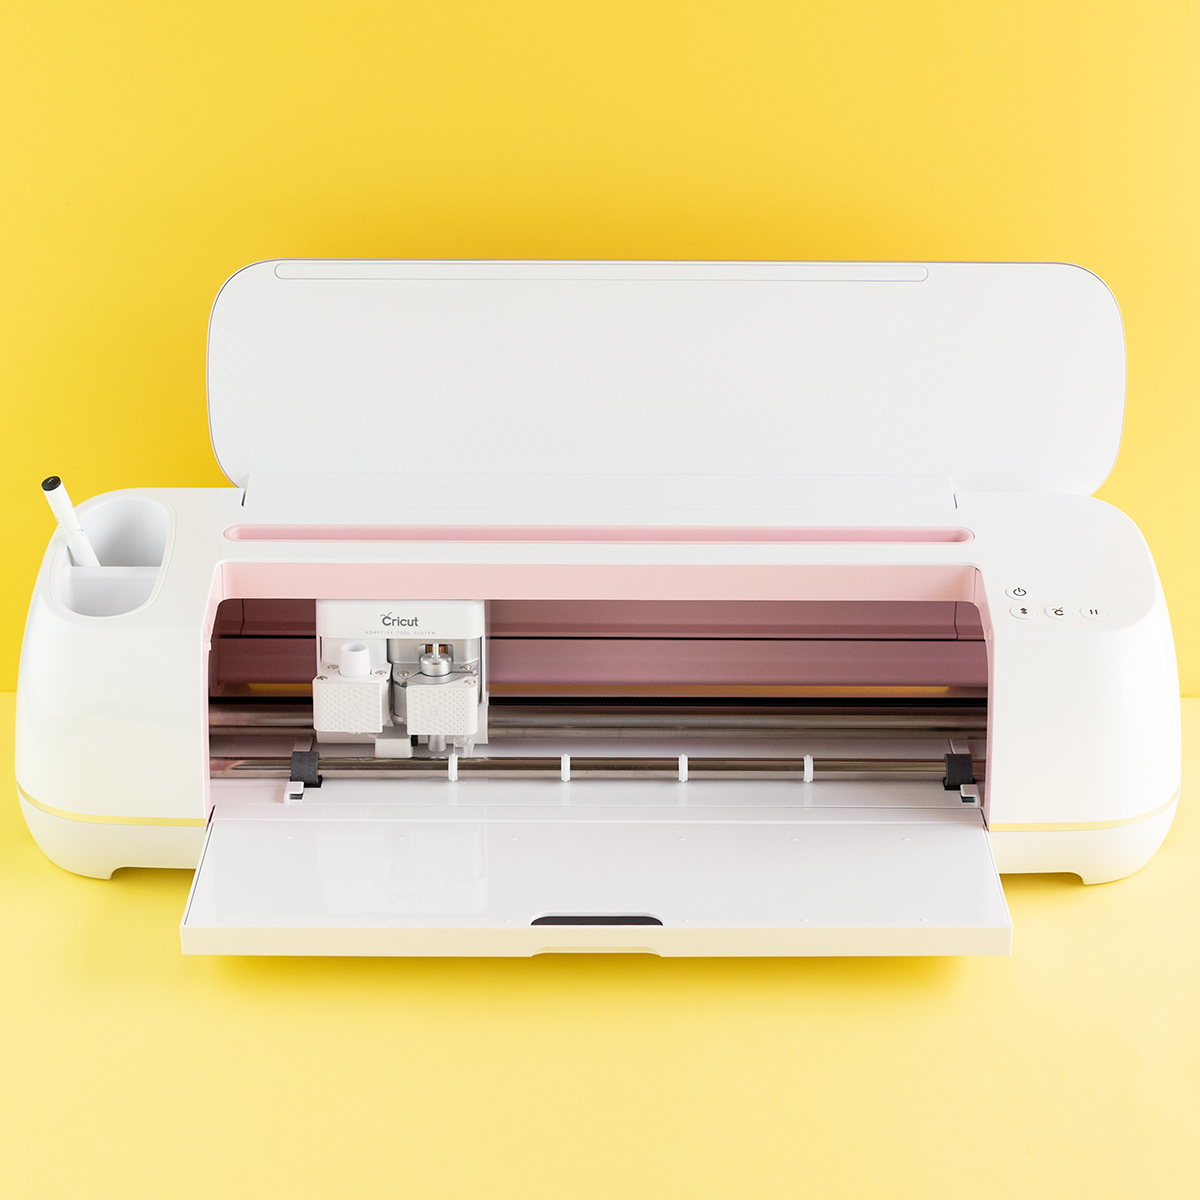 Your Cricut Maker Questions Answered